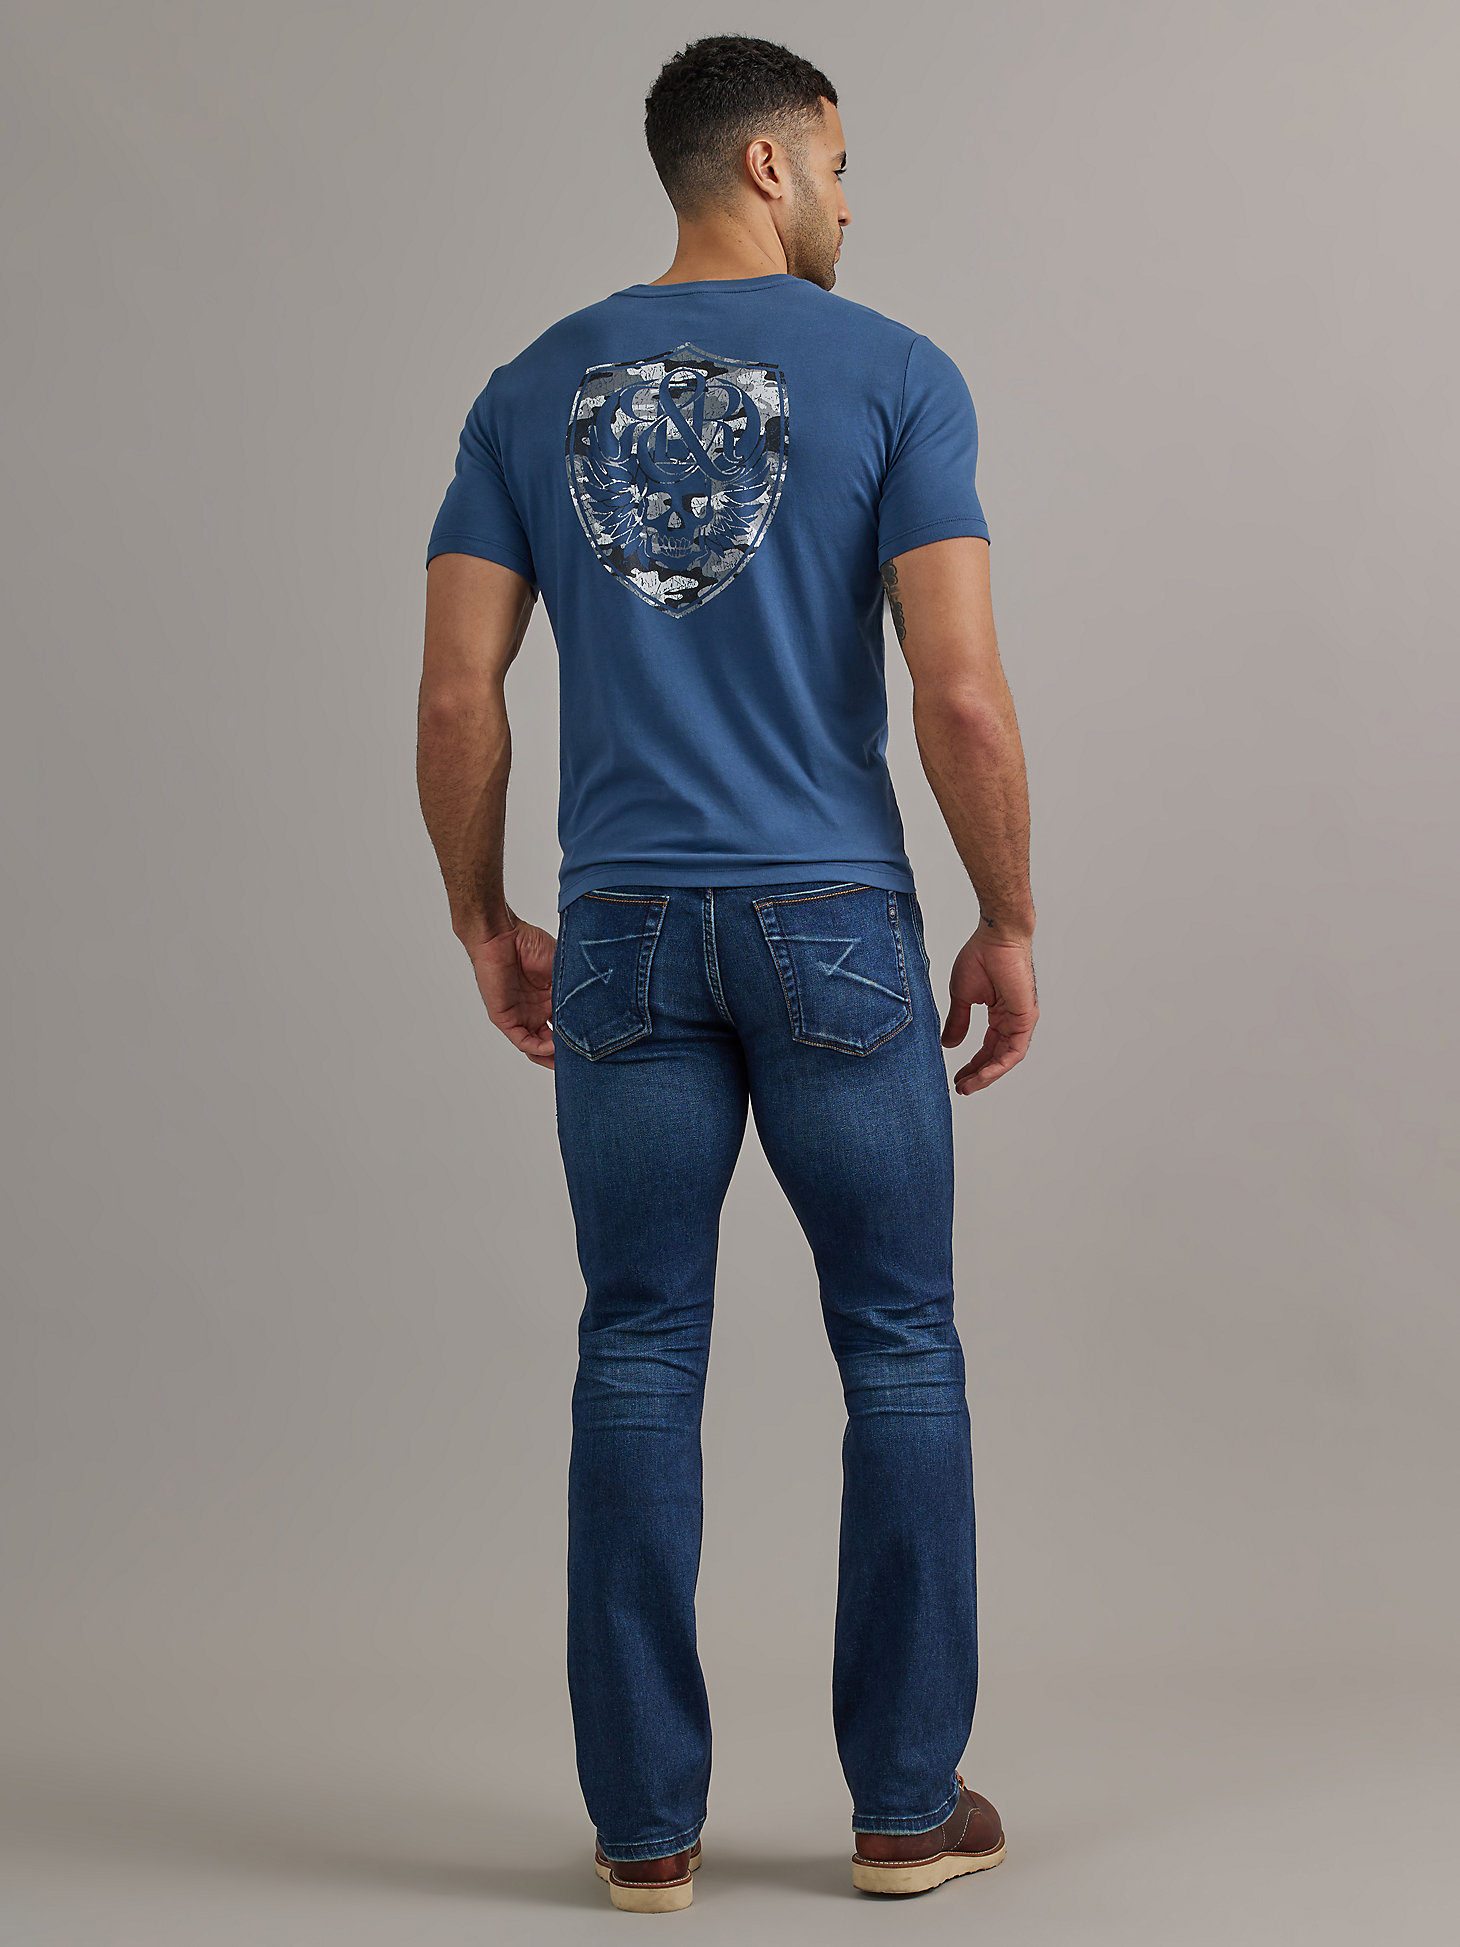 Men's Henlee Bootcut Jean in Hall of Fame alternative view 1